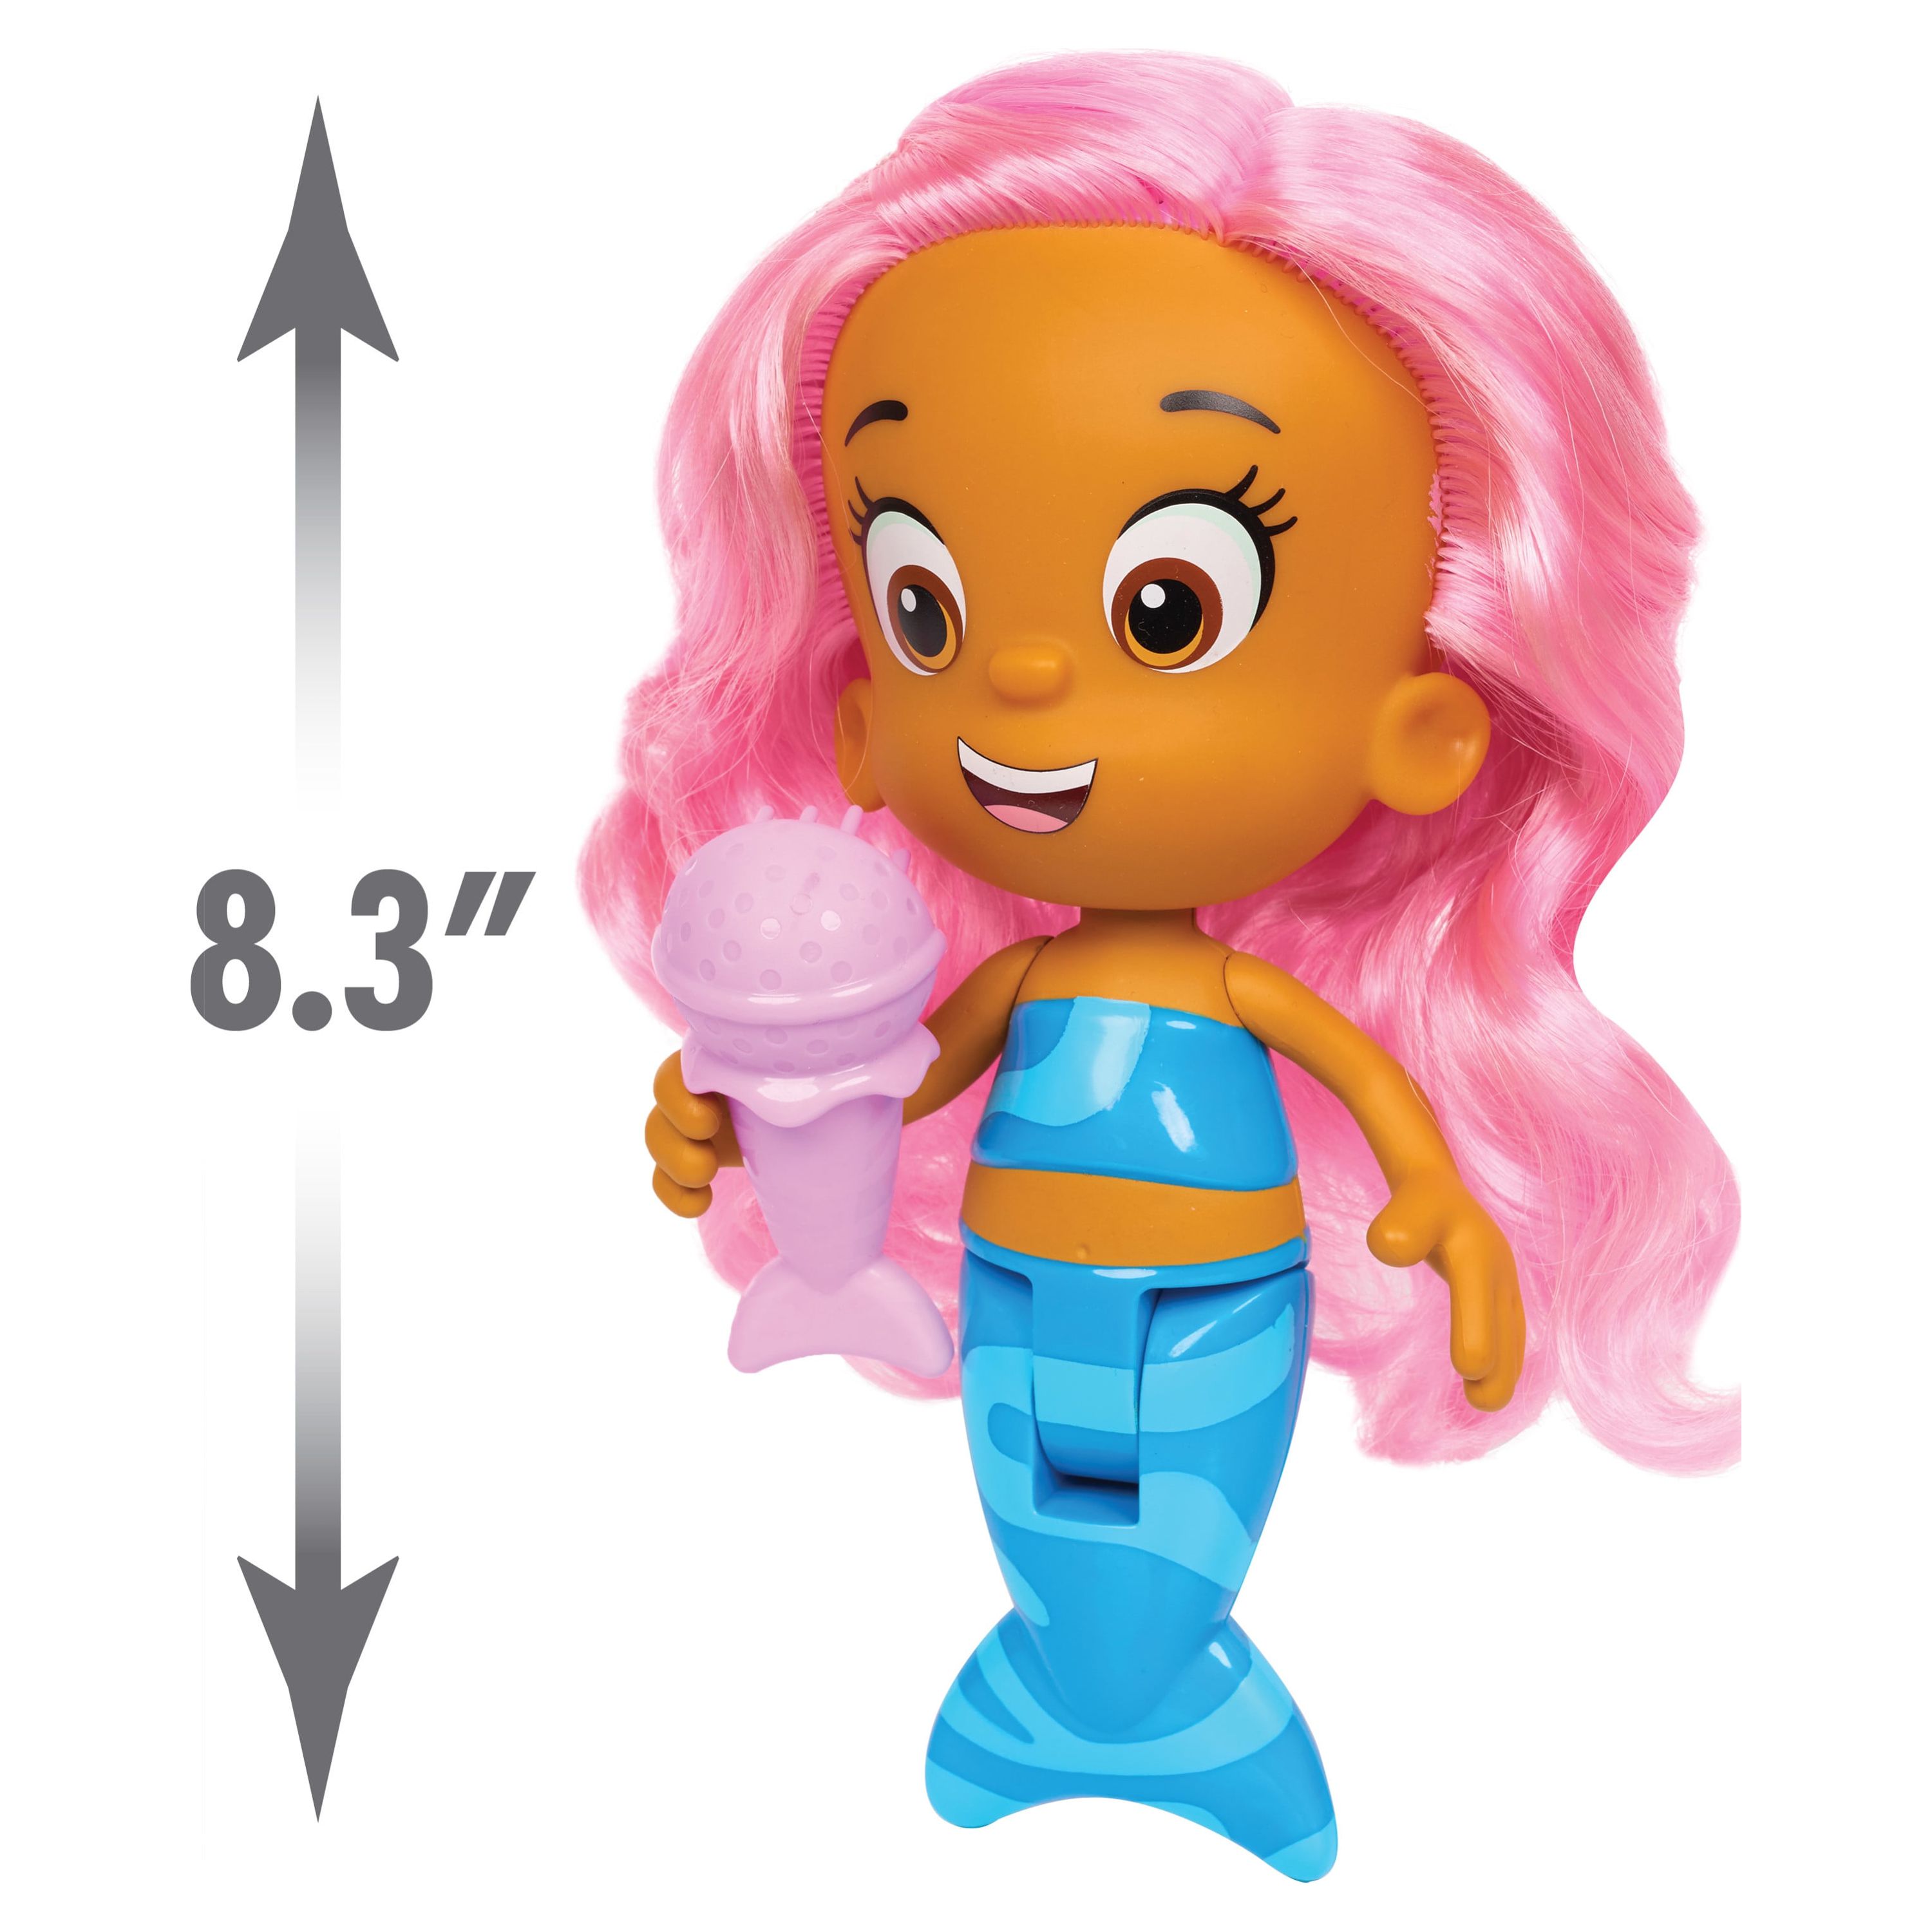 Bubble Guppies Splash and Surprise Molly Bath Doll,  Kids Toys for Ages 3 Up, Gifts and Presents - image 4 of 5